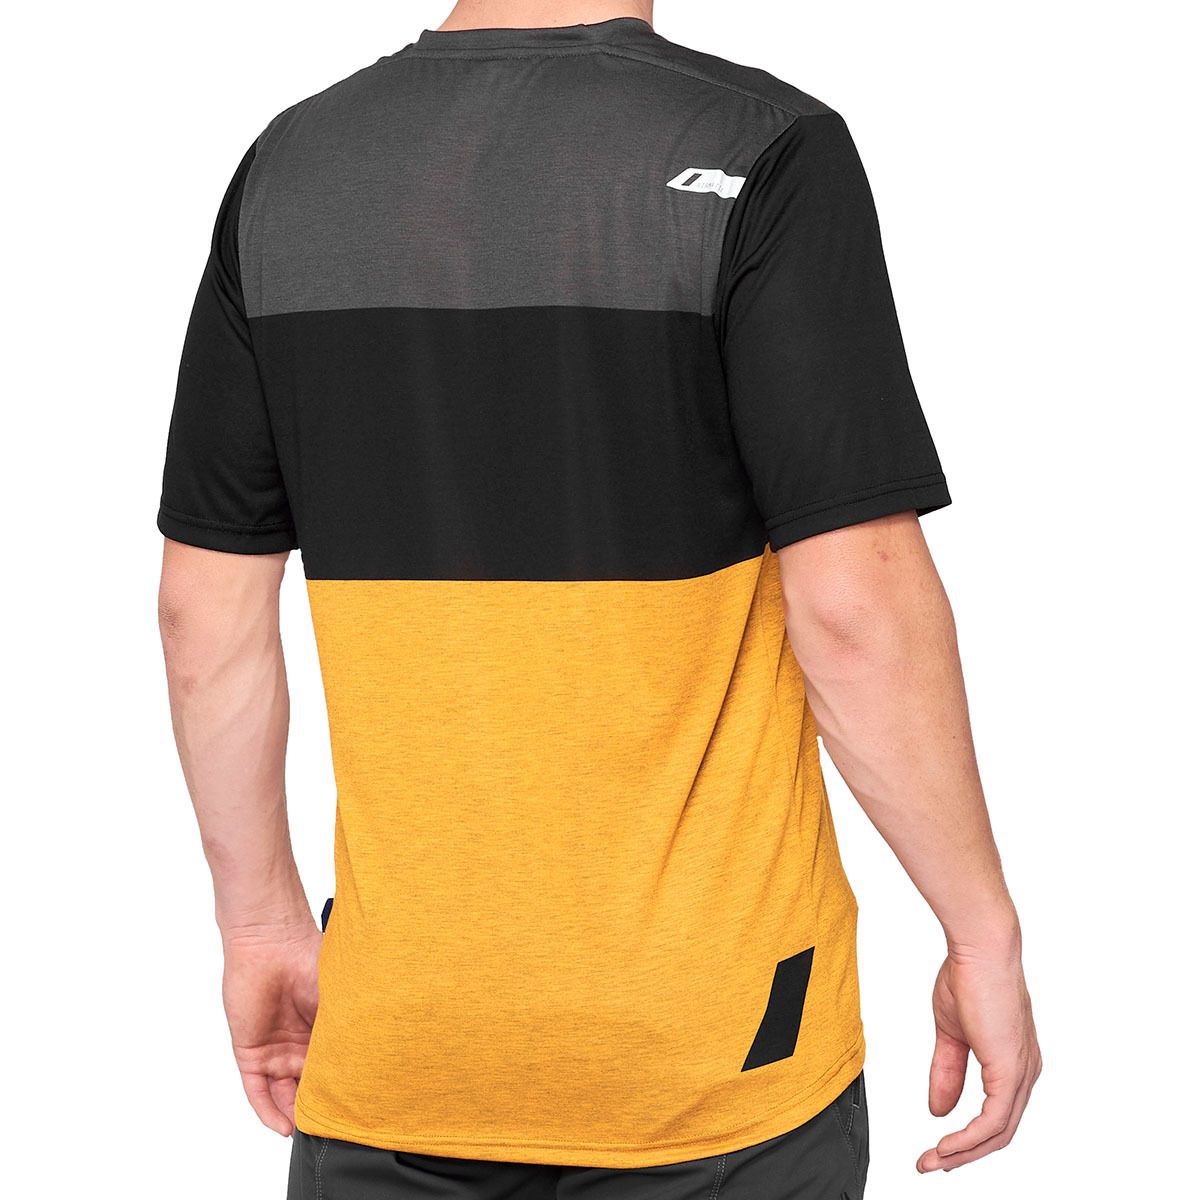 100% Airmatic Jersey Hommes Taille Large L Shirt honneur 100% MX Motocross Neuf